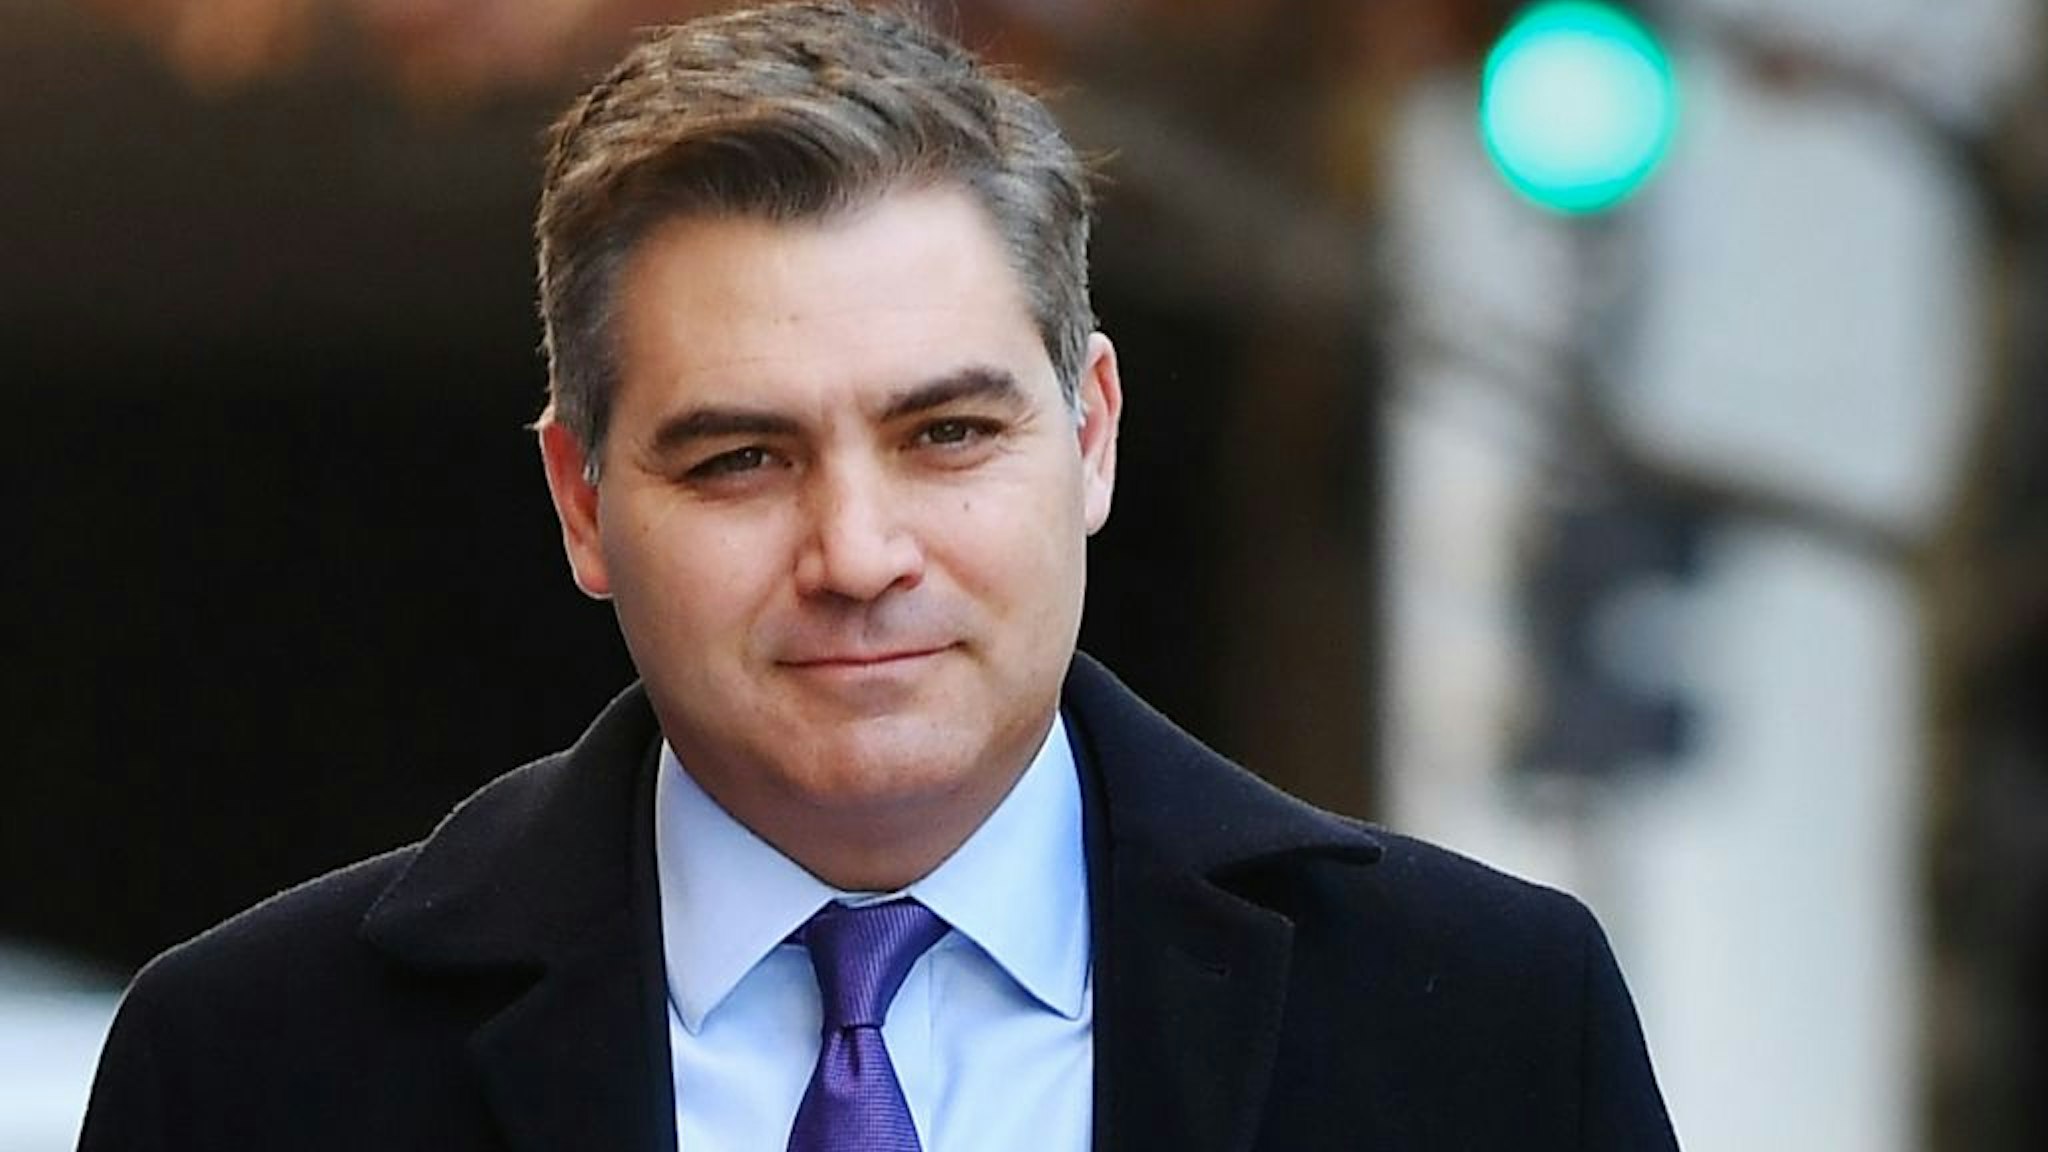 CNN White House correspondent Jim Acosta arrives at US District Court in Washington, DC, on November 16, 2018, where Judge Timothy Kelly ordered the White House to reinstate Acosta's press credentials